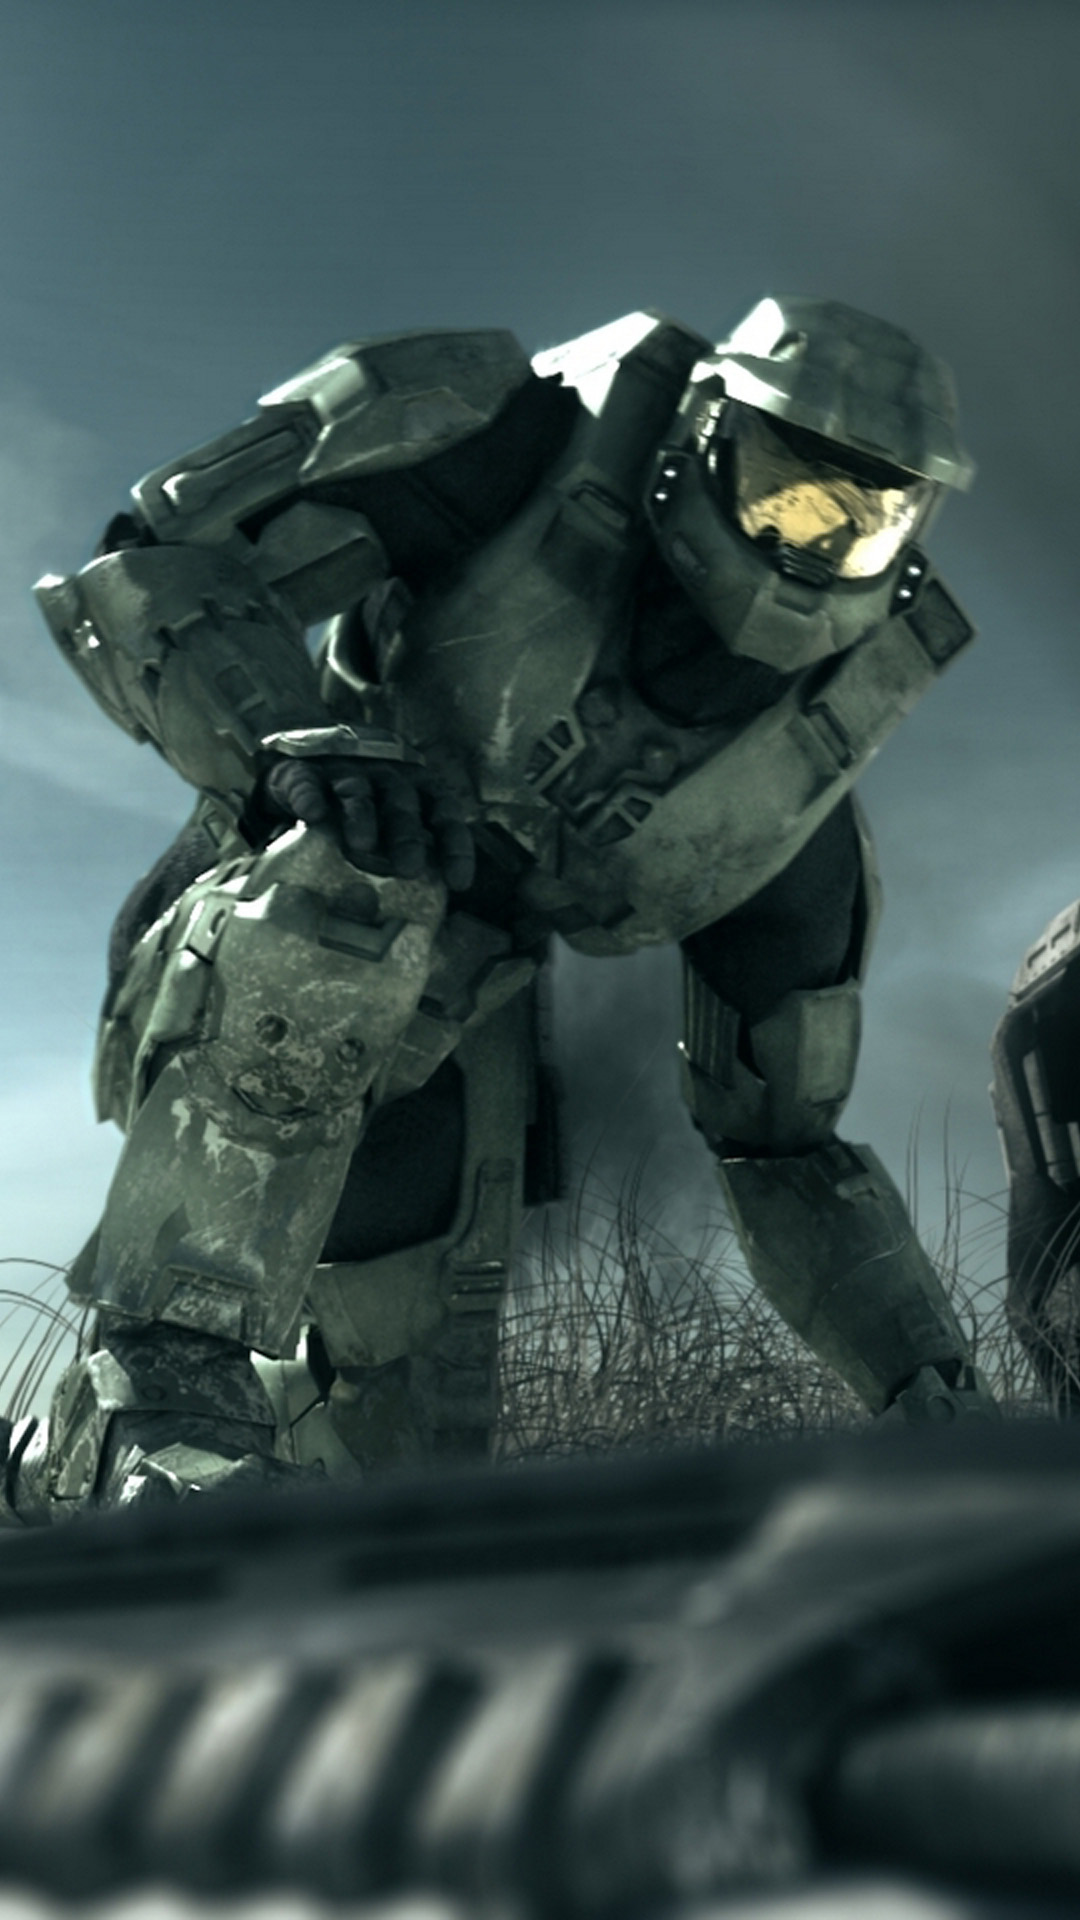 halo iphone wallpaper,mecha,action adventure game,soldier,games,technology